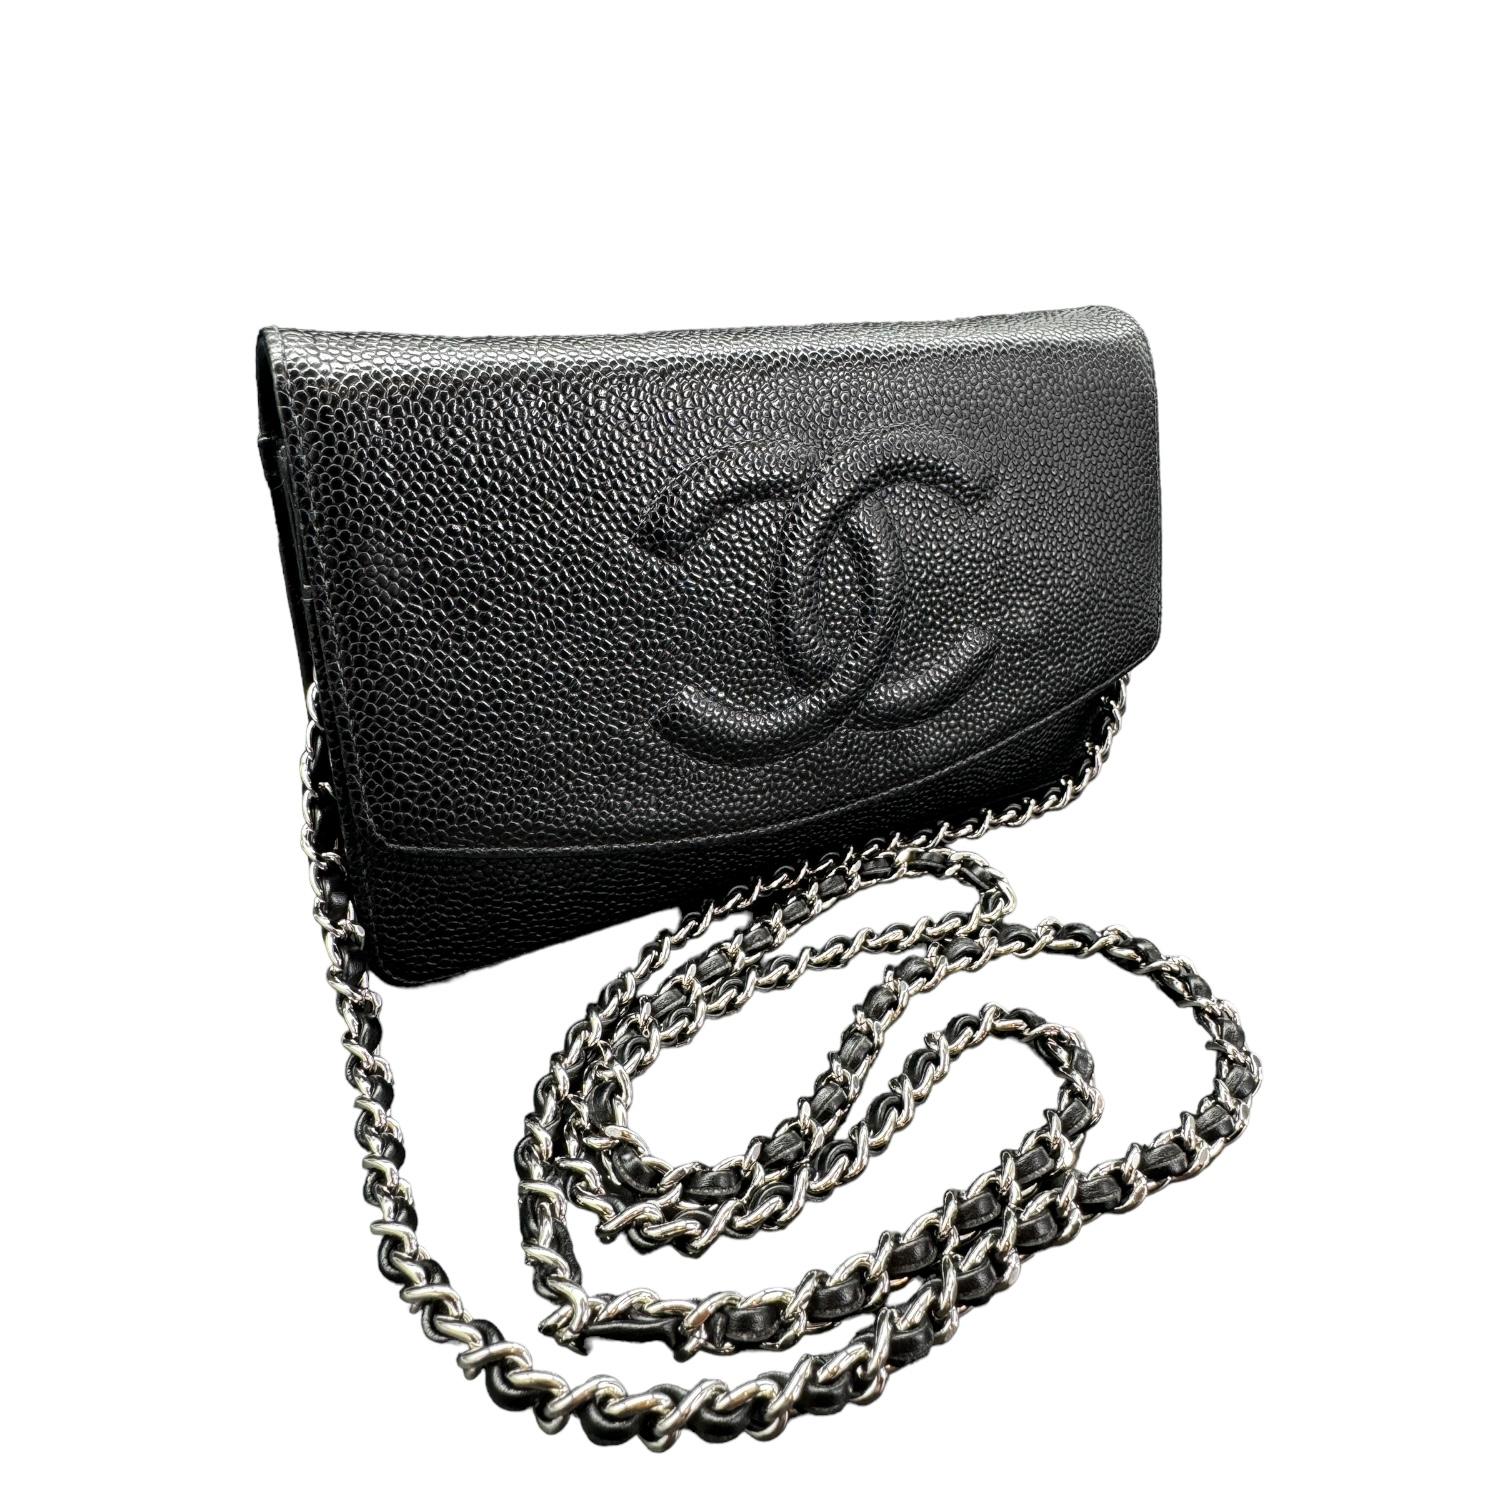 This stylish wallet is crafted of luxuriously textured caviar leather in black, with a Chanel CC logo embossed on the front. The bag features a leather threaded silver chain-link shoulder strap and a crossover flap. This opens to a black grosgrain